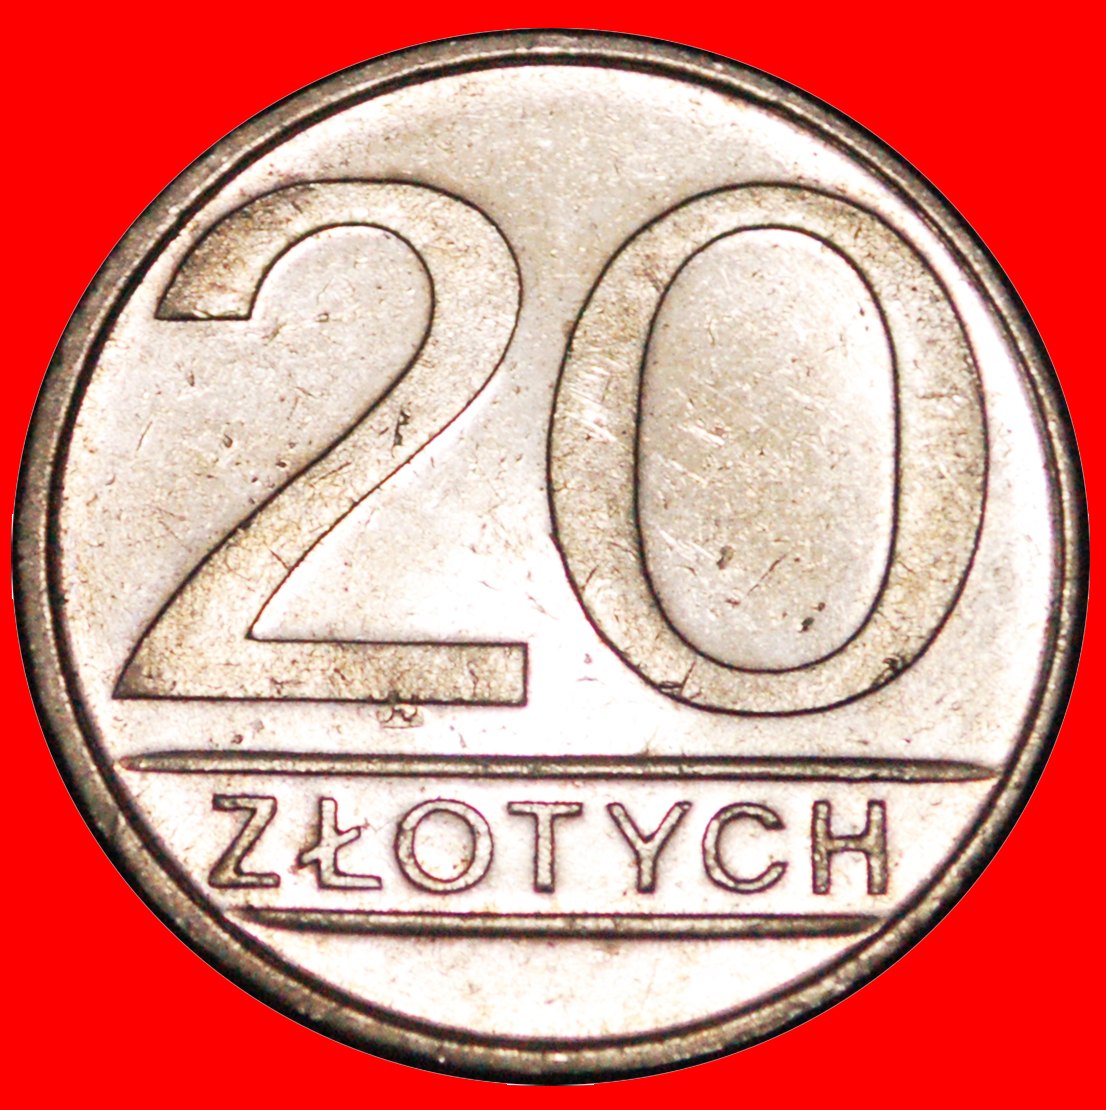  * STARS ON EAGLE: POLAND ★ 20 ZLOTY 1986! DISCOVERY COIN! ★LOW START ★ NO RESERVE!   